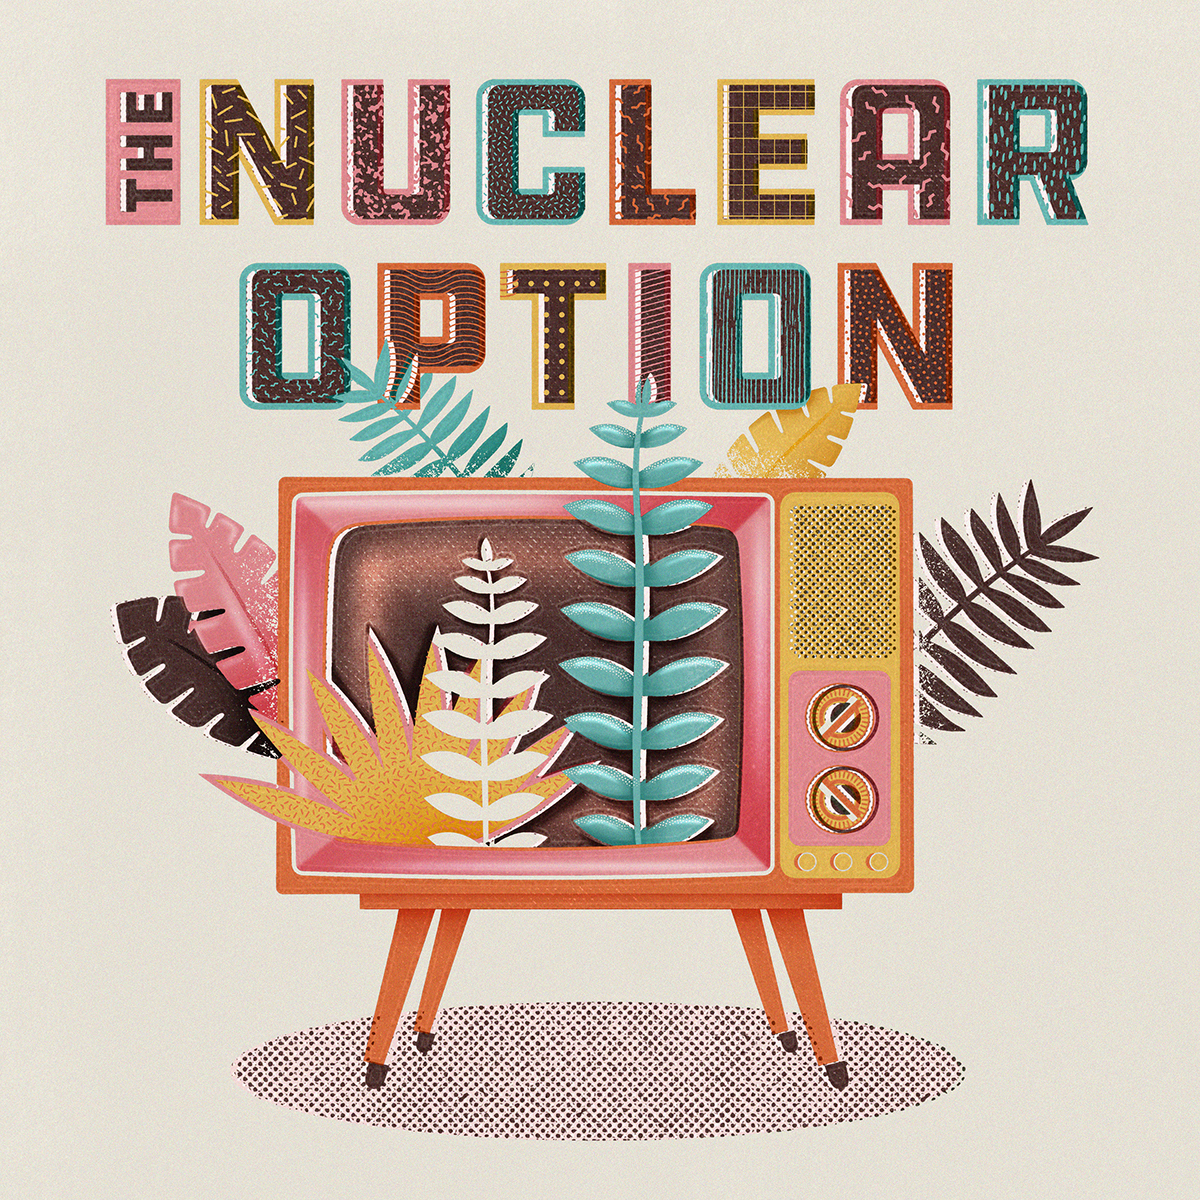 nuclear atomic bomb podcast Radio television ruin Renewal risk survival